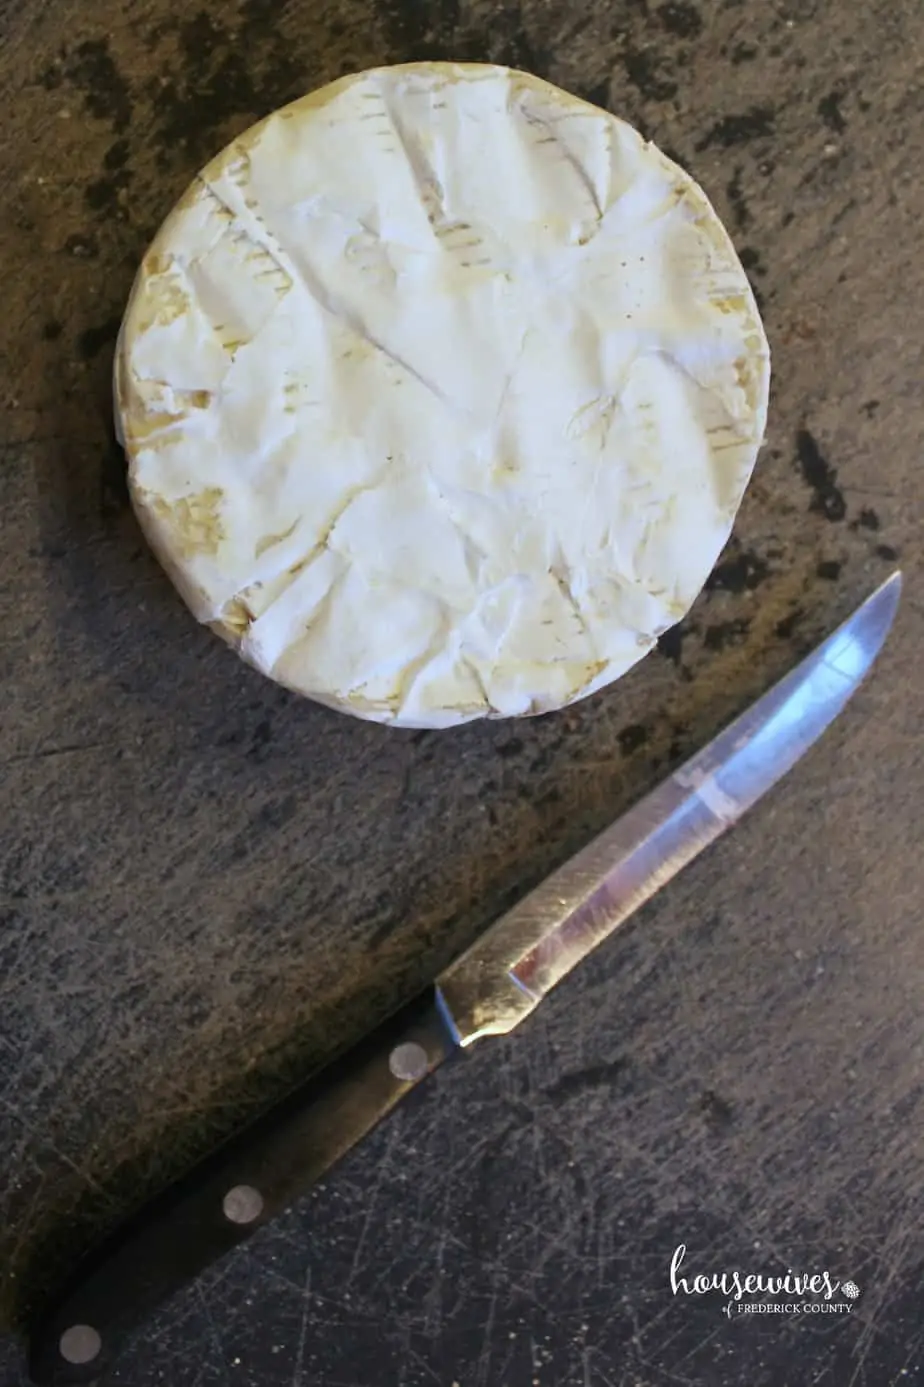 Start with a wheel of brie cheese